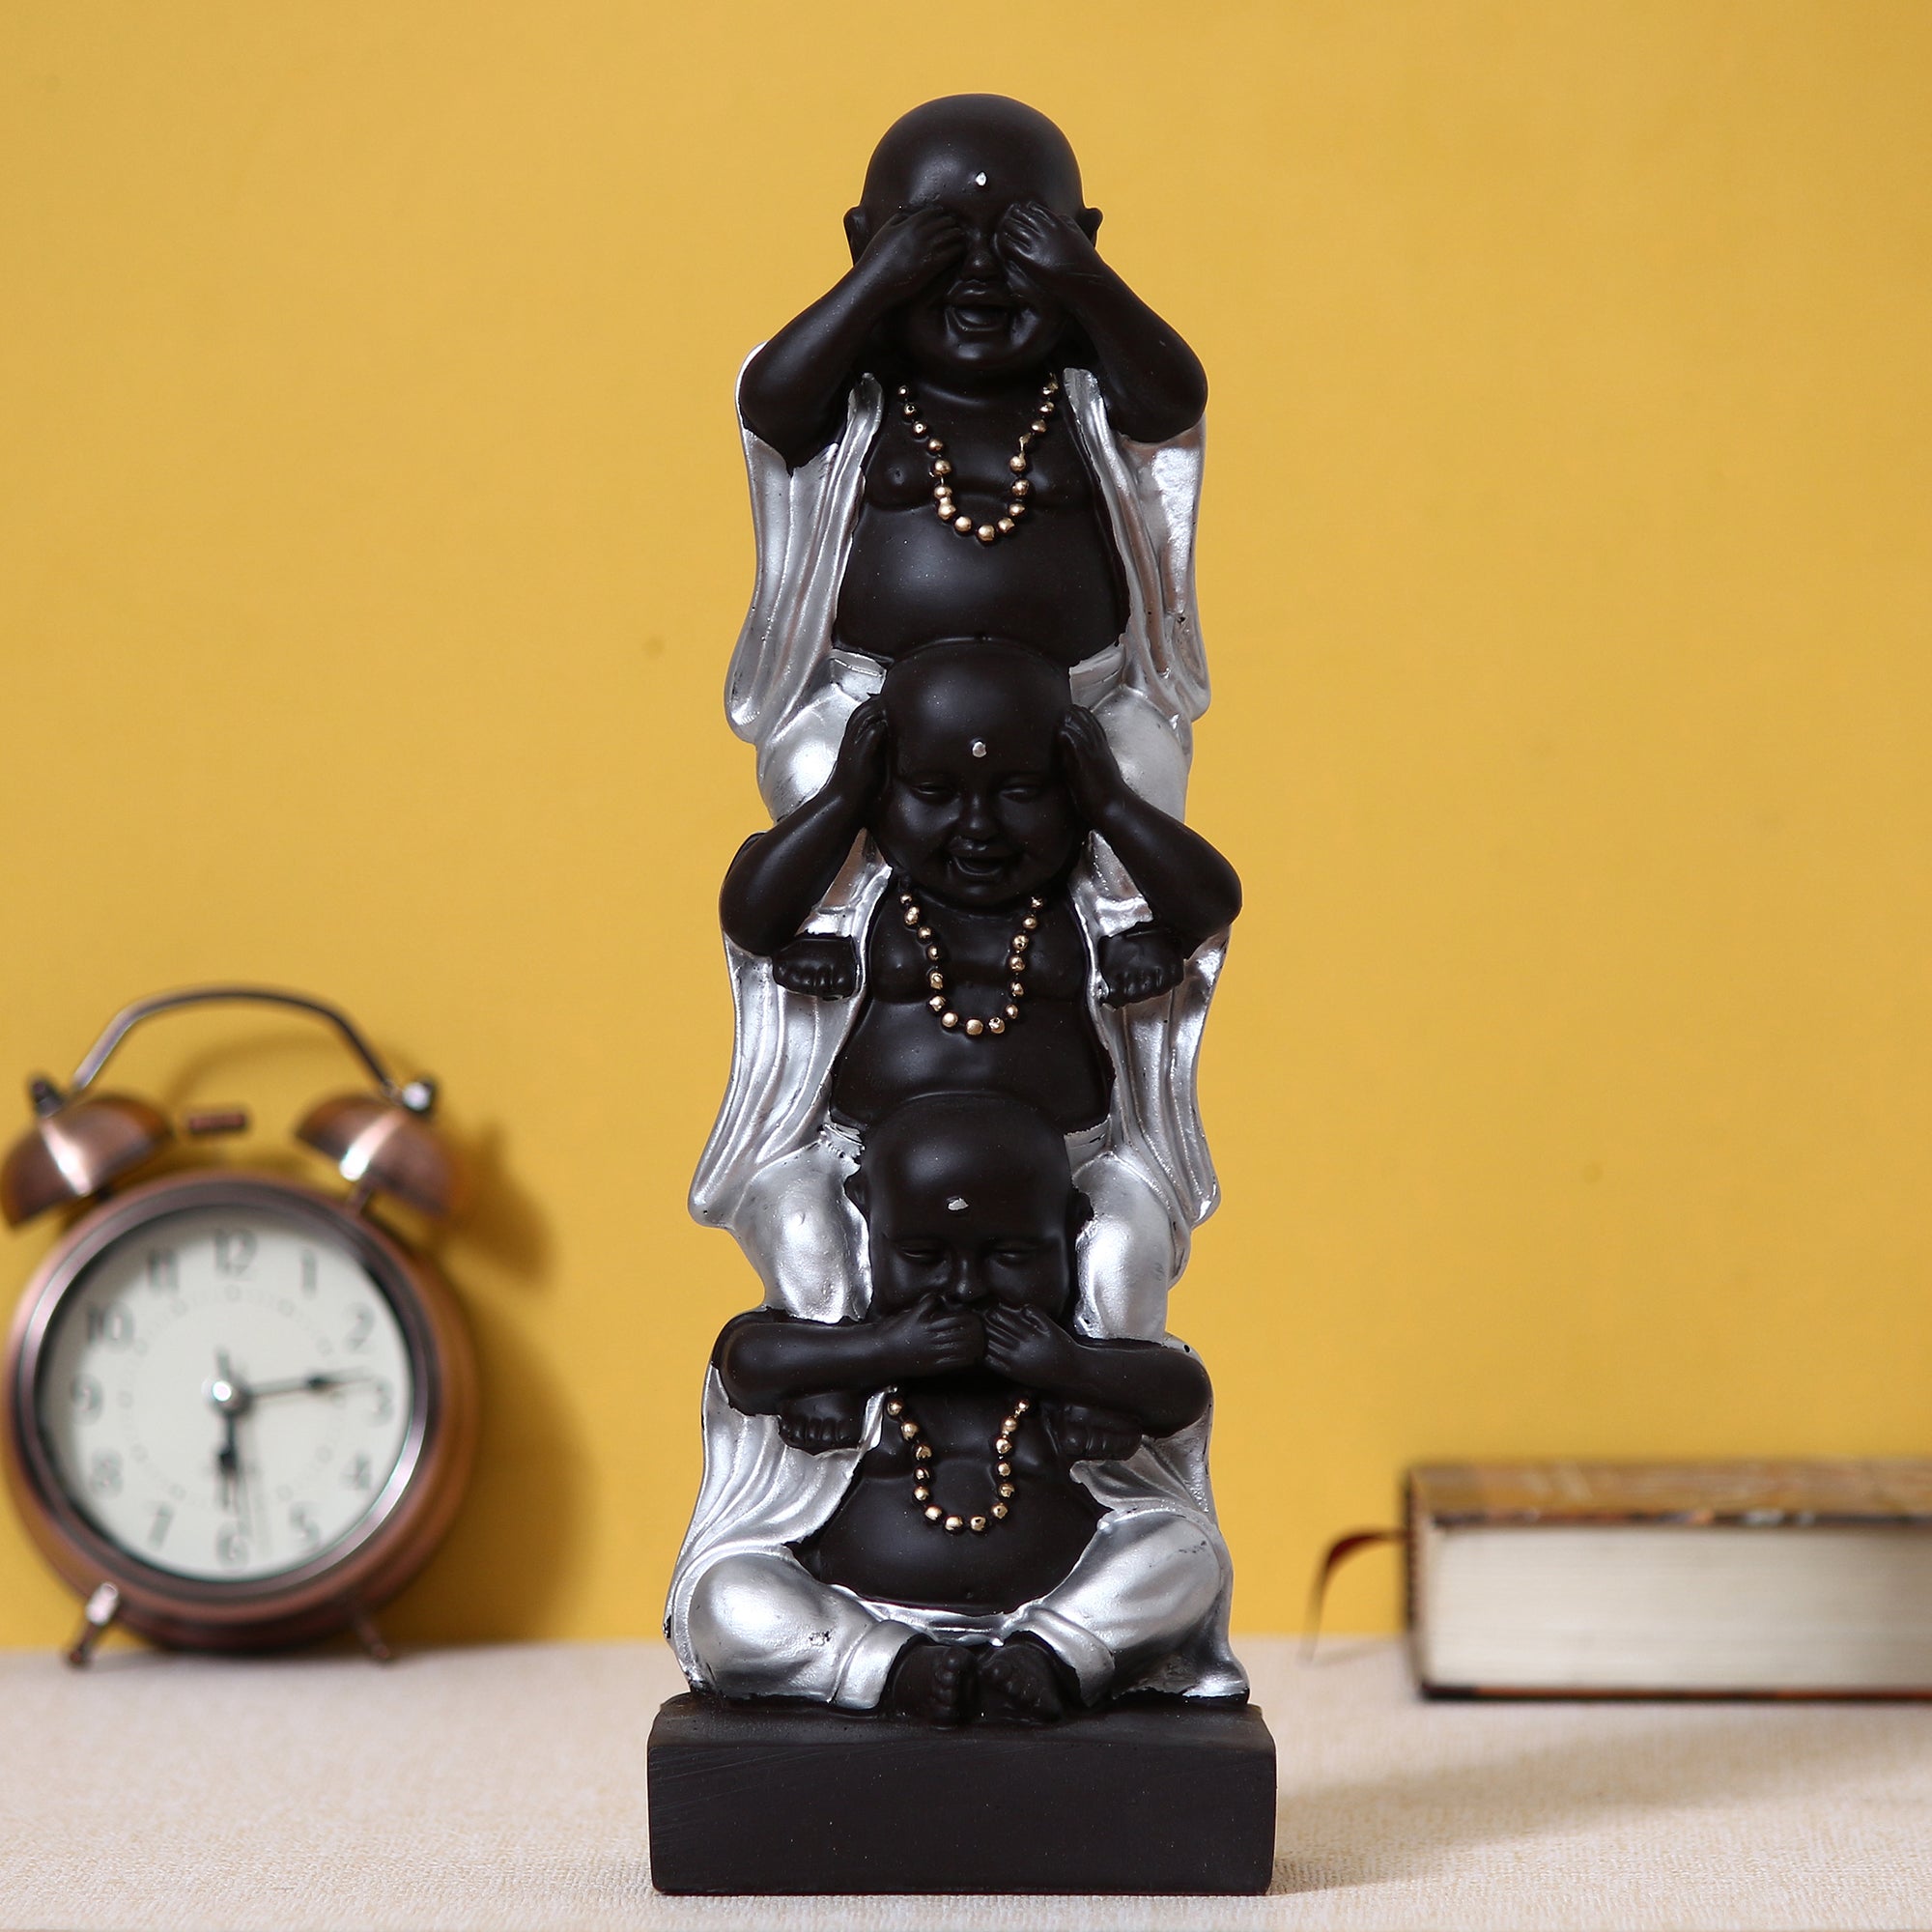 Polyresin Silver and Black Set of 3 Laughing Buddha Idol Standing on each other Decorative Showpiece